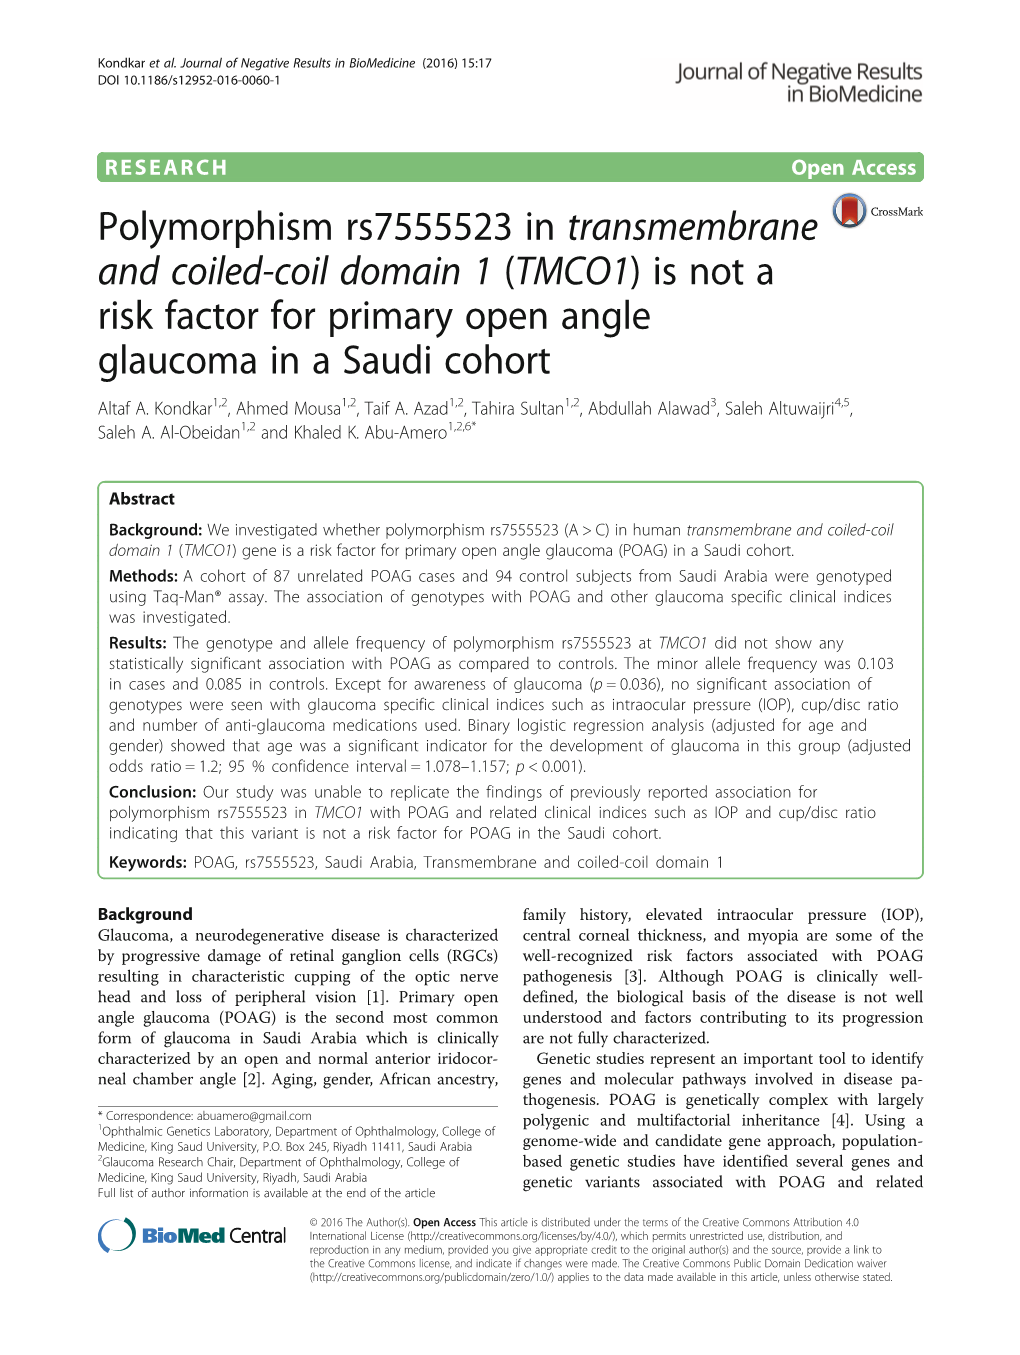 (TMCO1) Is Not a Risk Factor for Primary Open Angle Glaucoma in a Saudi Cohort Altaf A